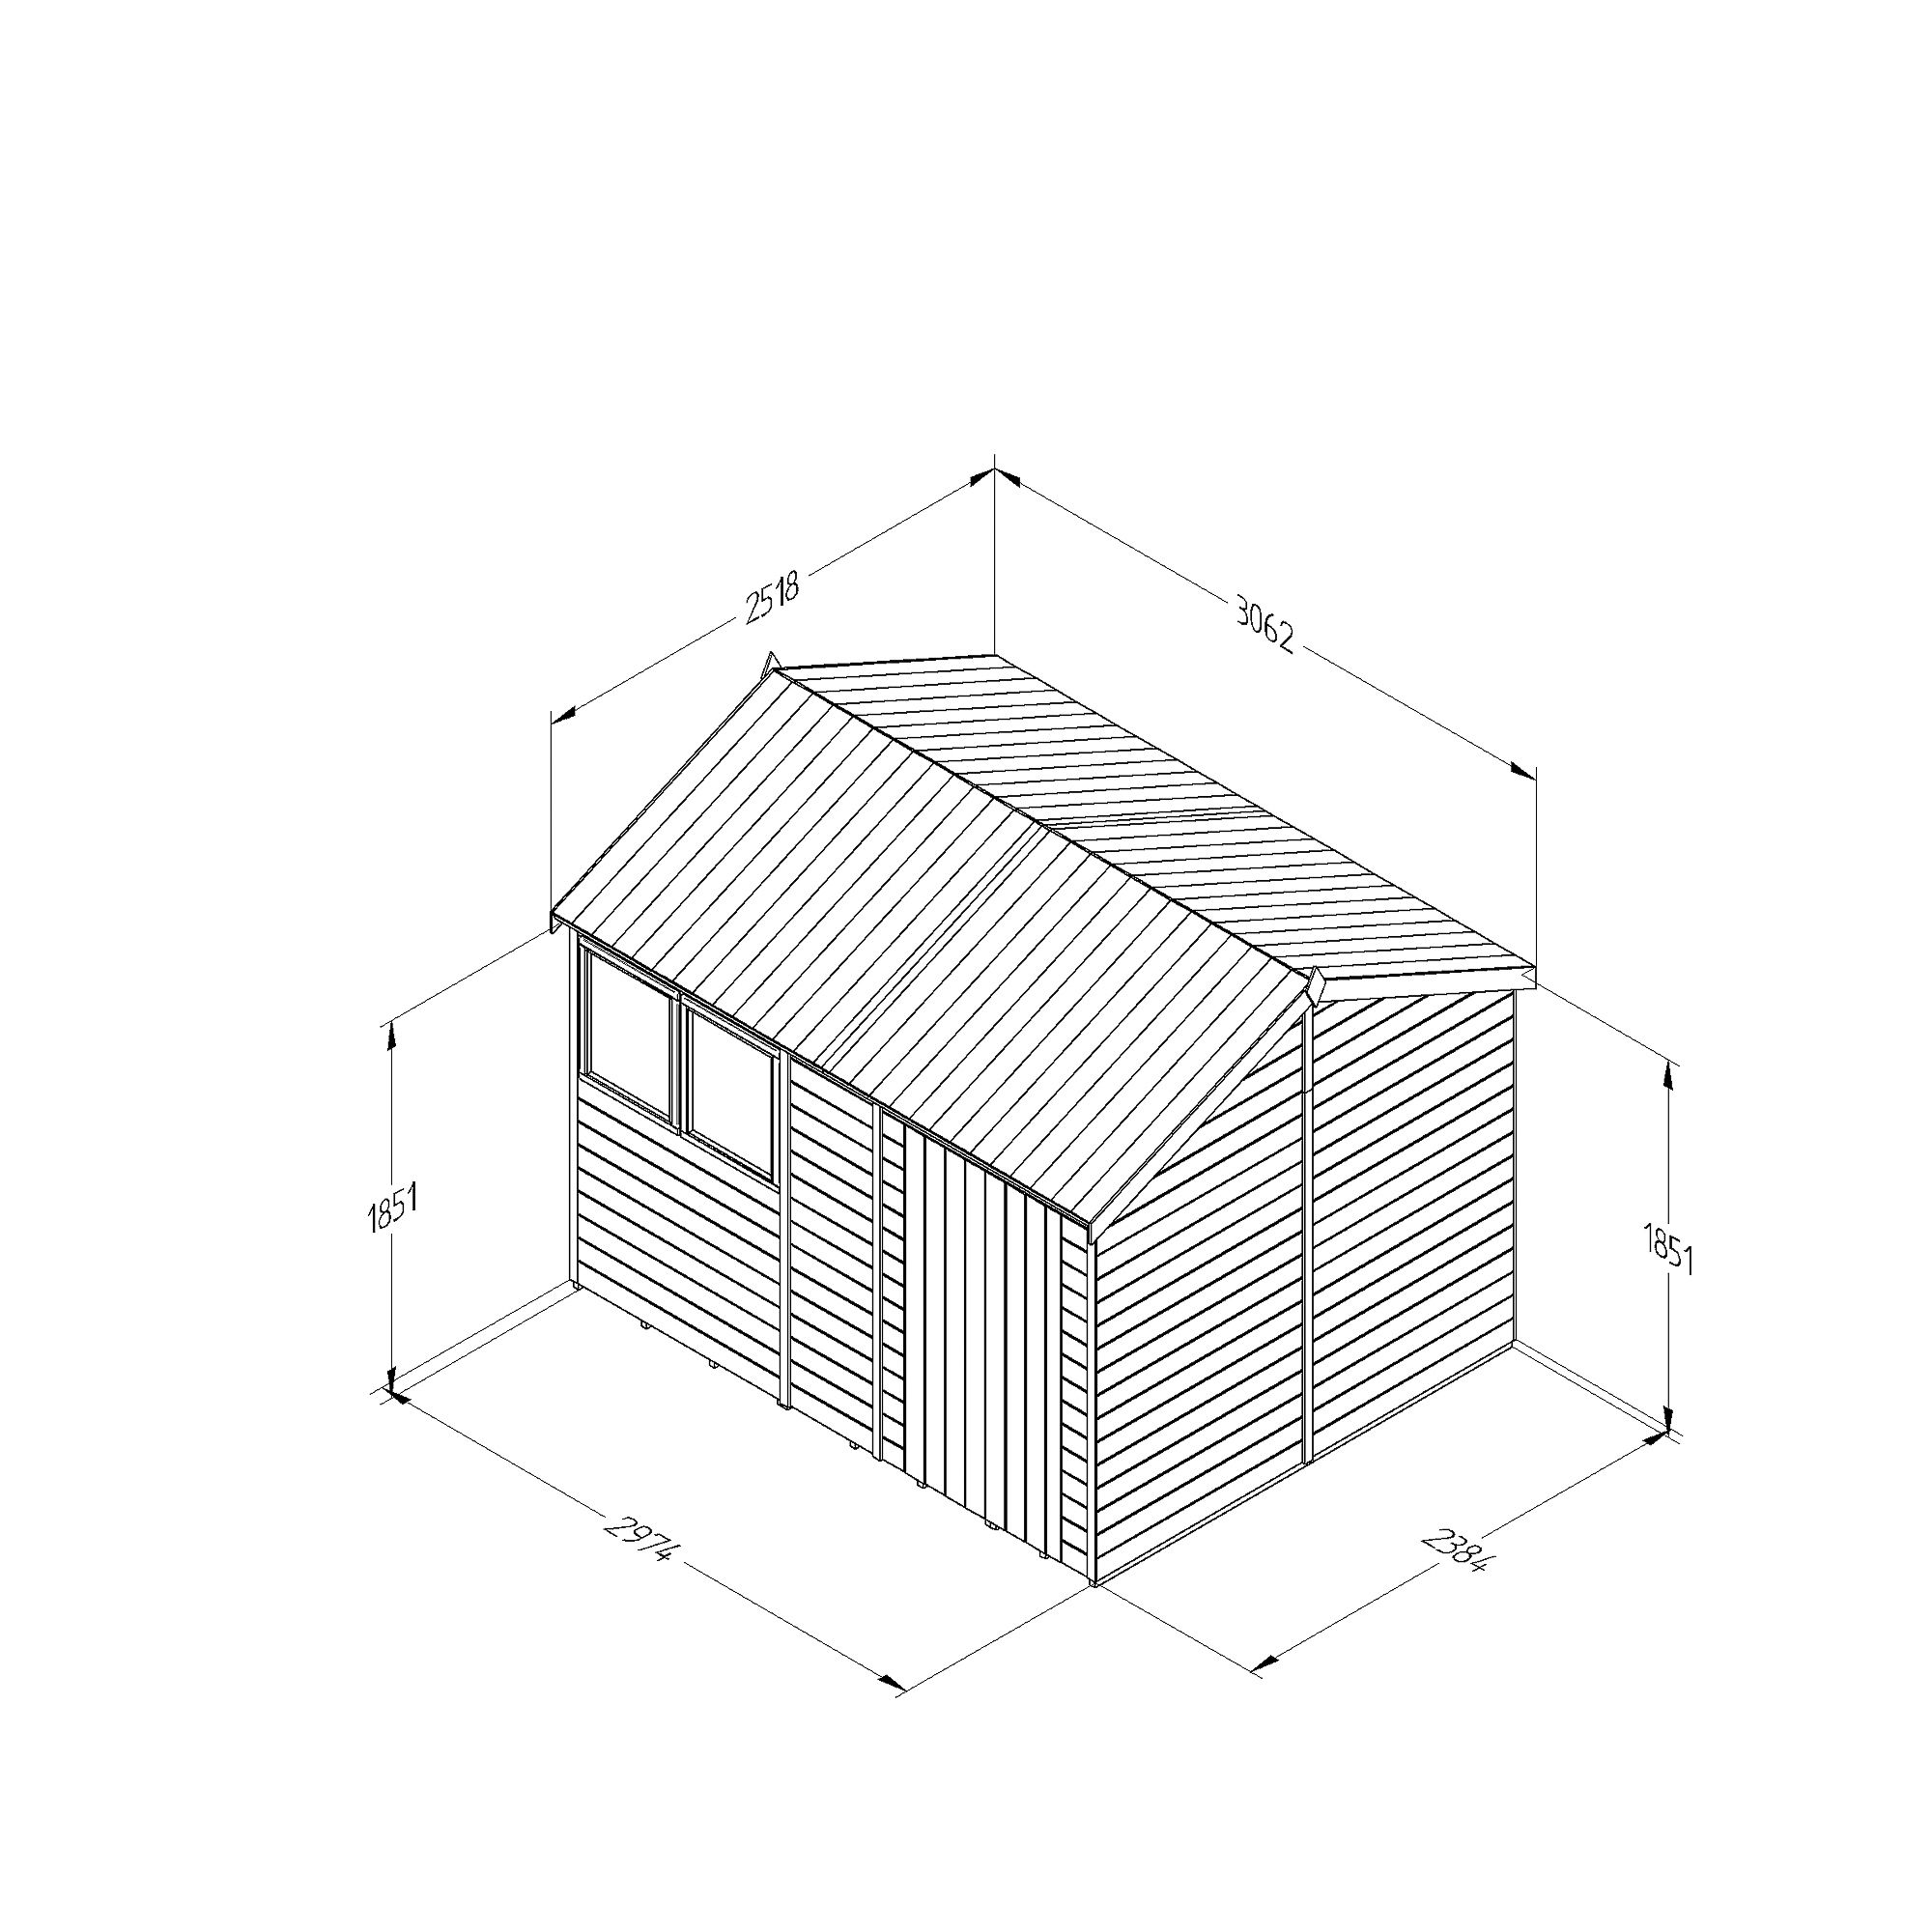 Forest Garden Timberdale 10x8 ft Reverse apex Wooden Shed with floor (Base included) - Assembly service included